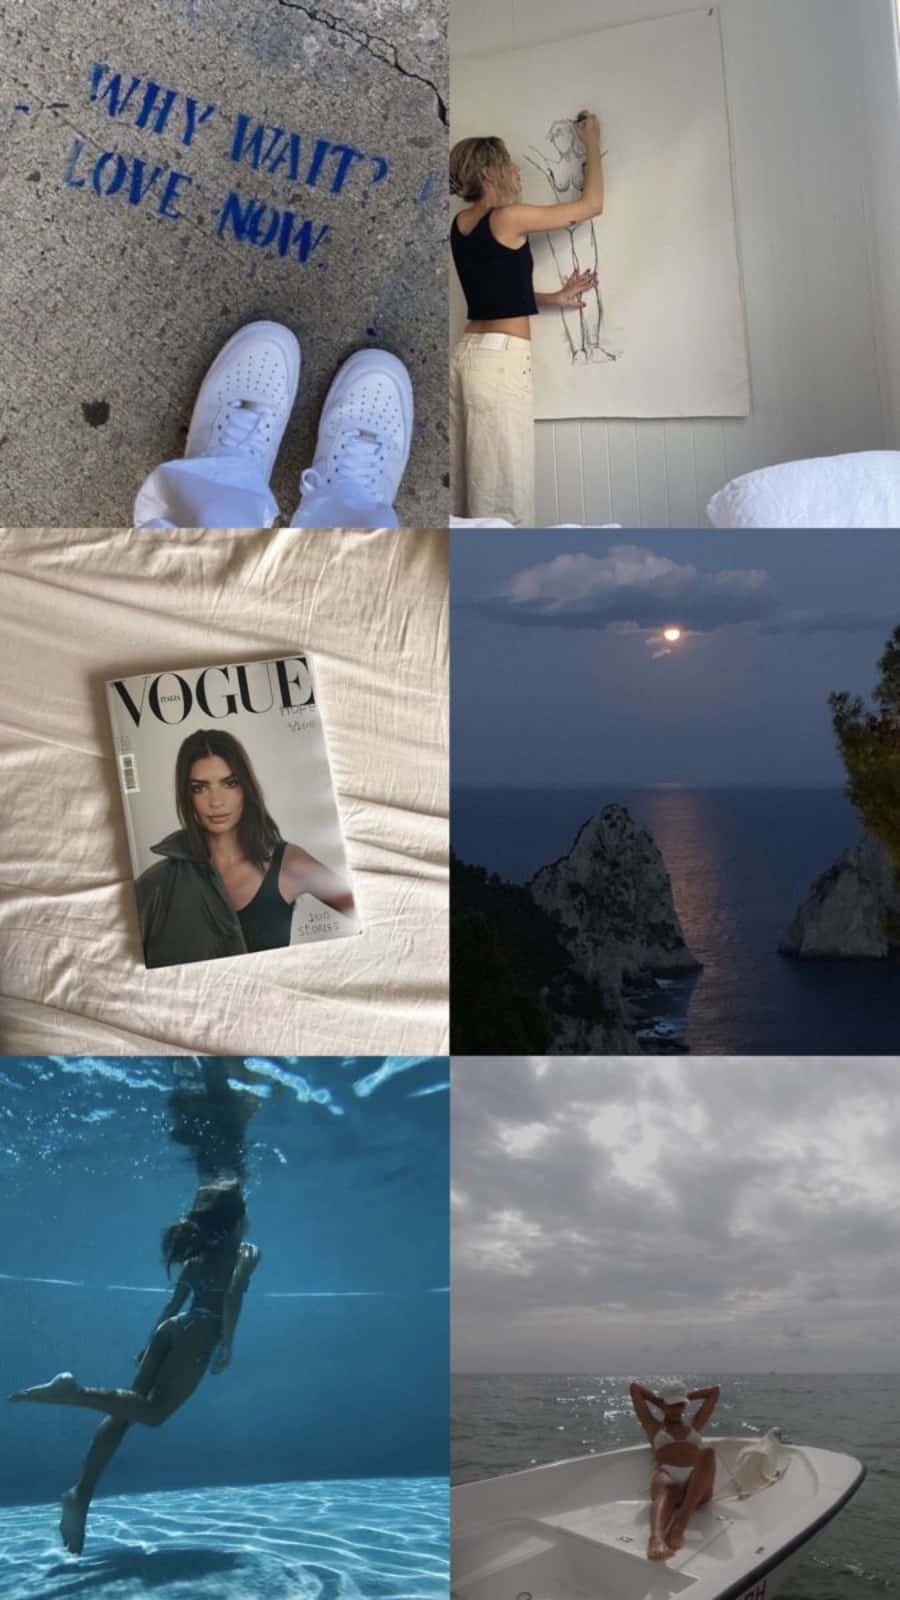 A Collage Of Photos With A Woman In The Water And A Woman On A Bed